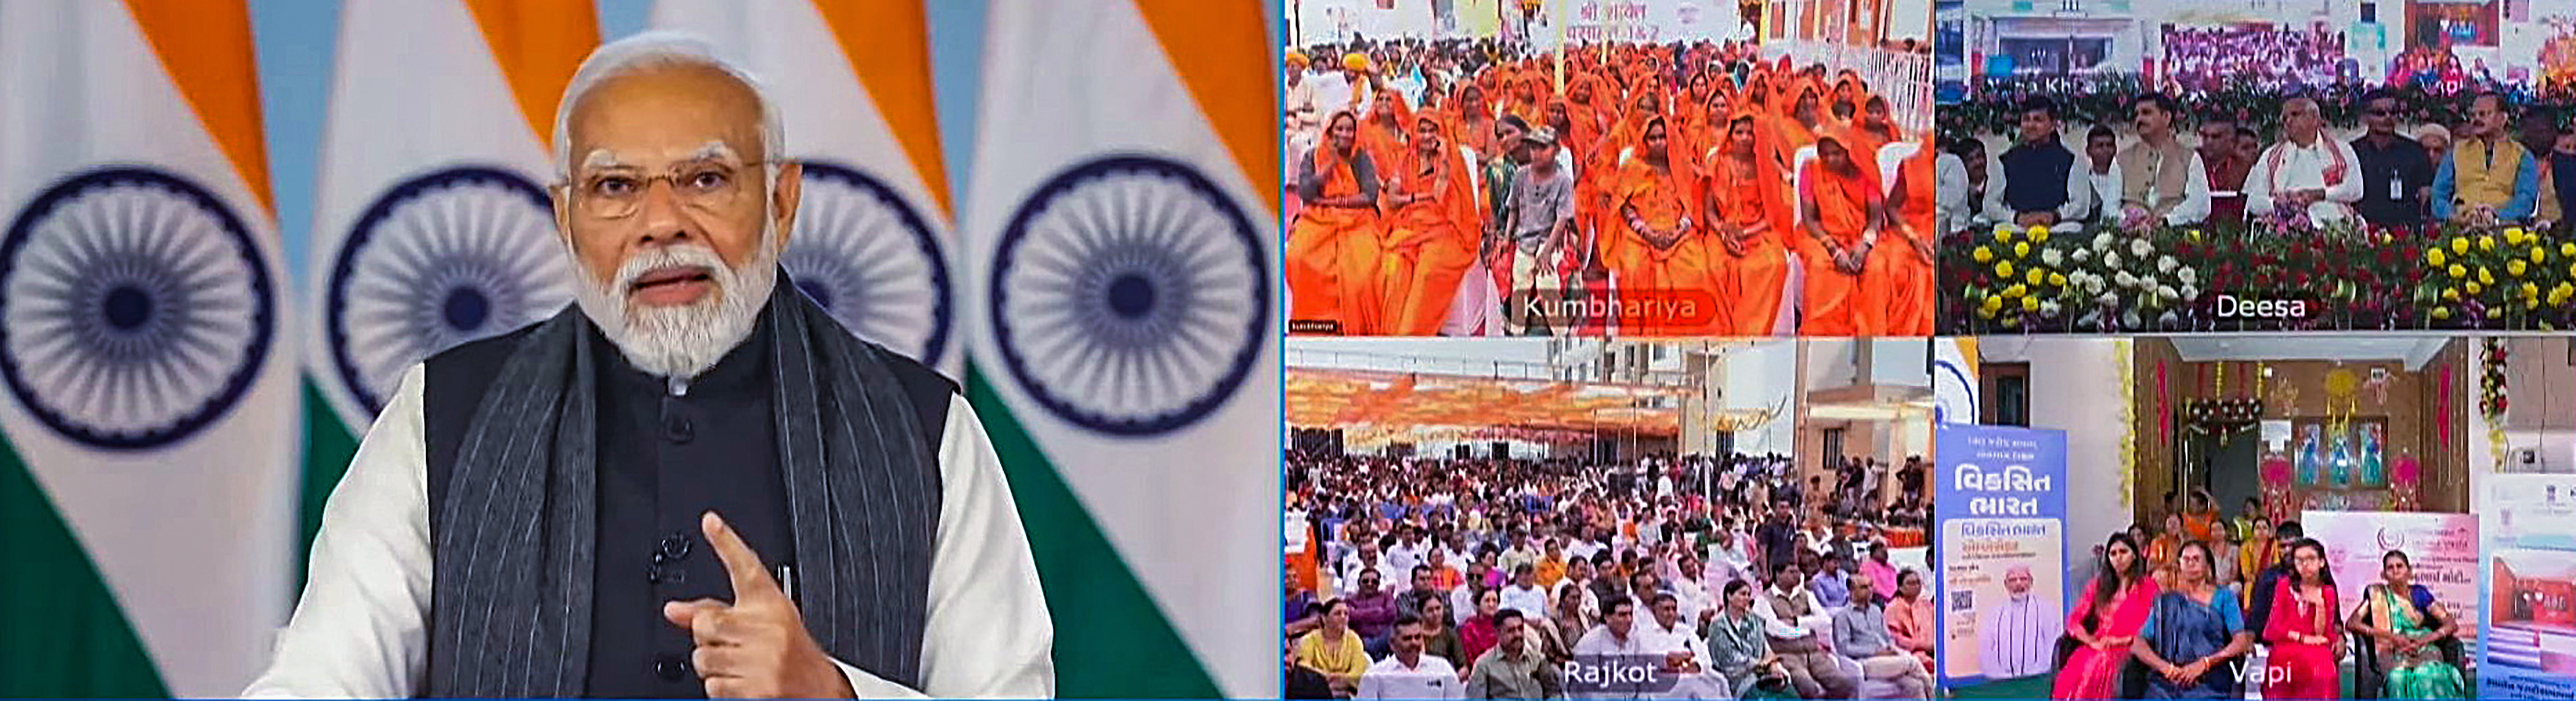 every indian has resolved to make india developed nation, it's time to create history: pm